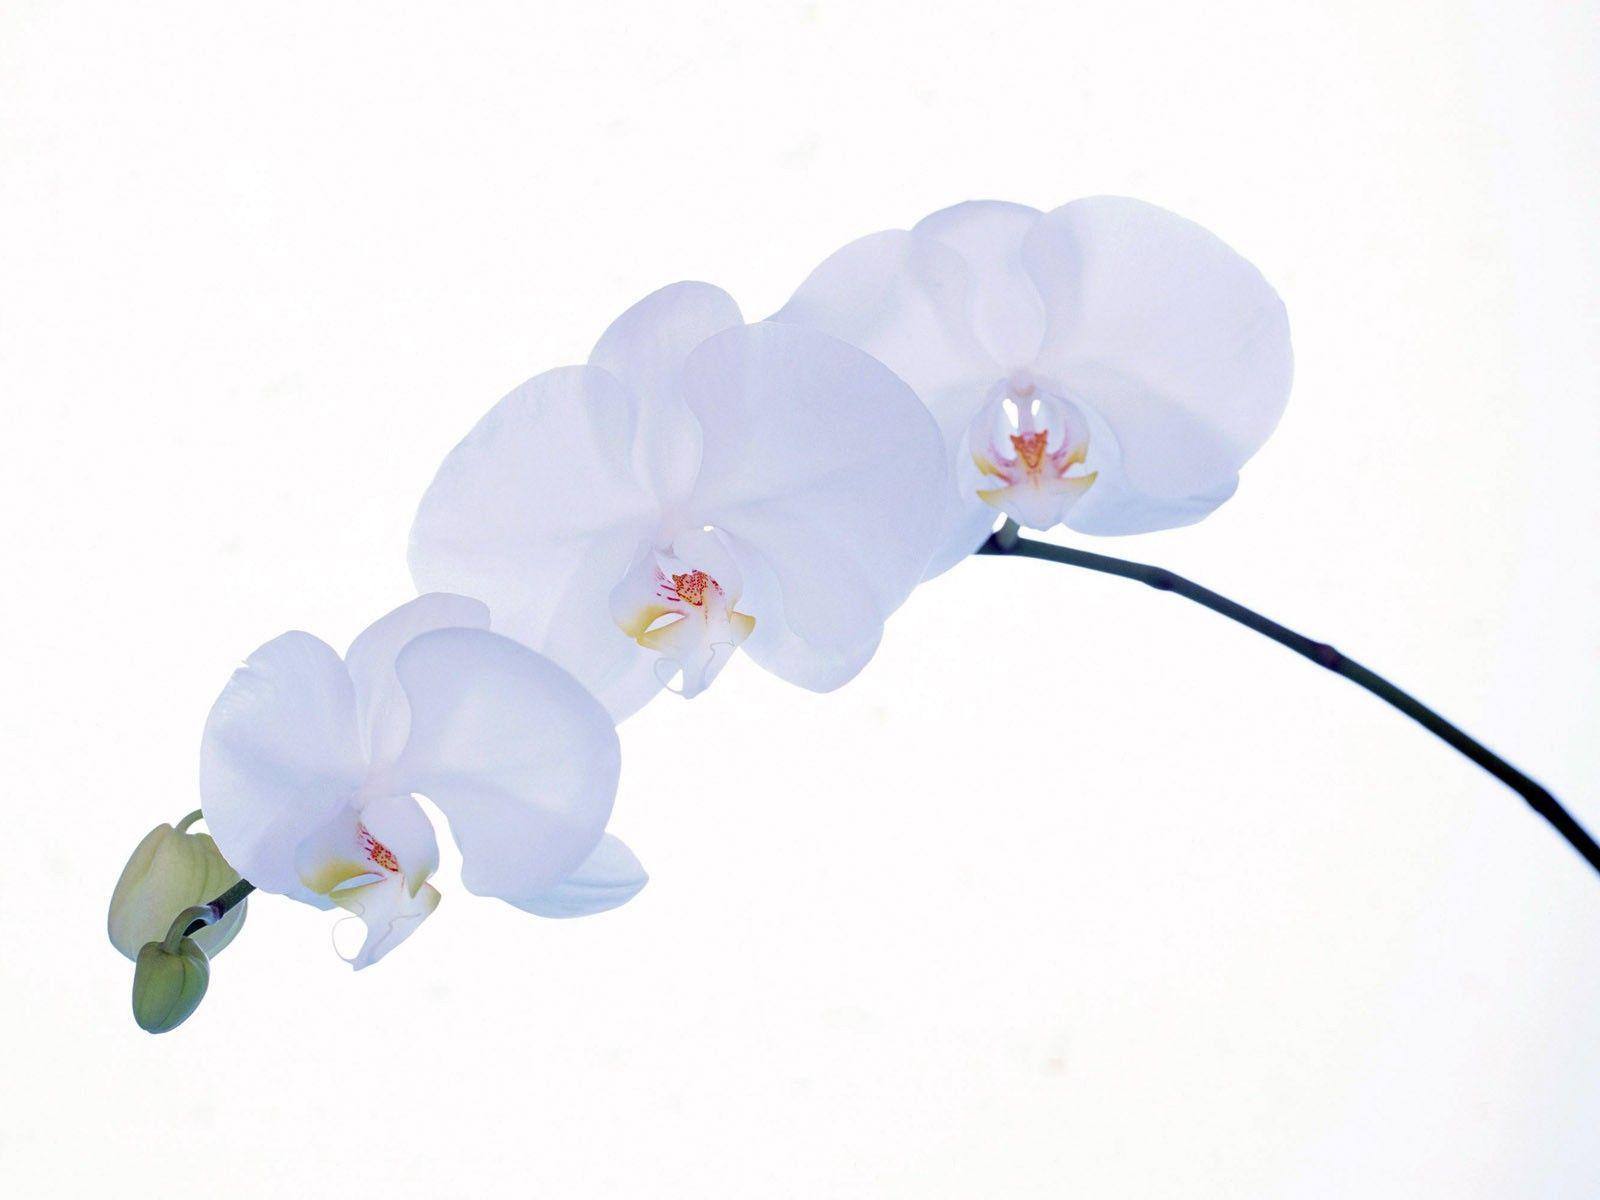 image For > White Orchids Wallpaper